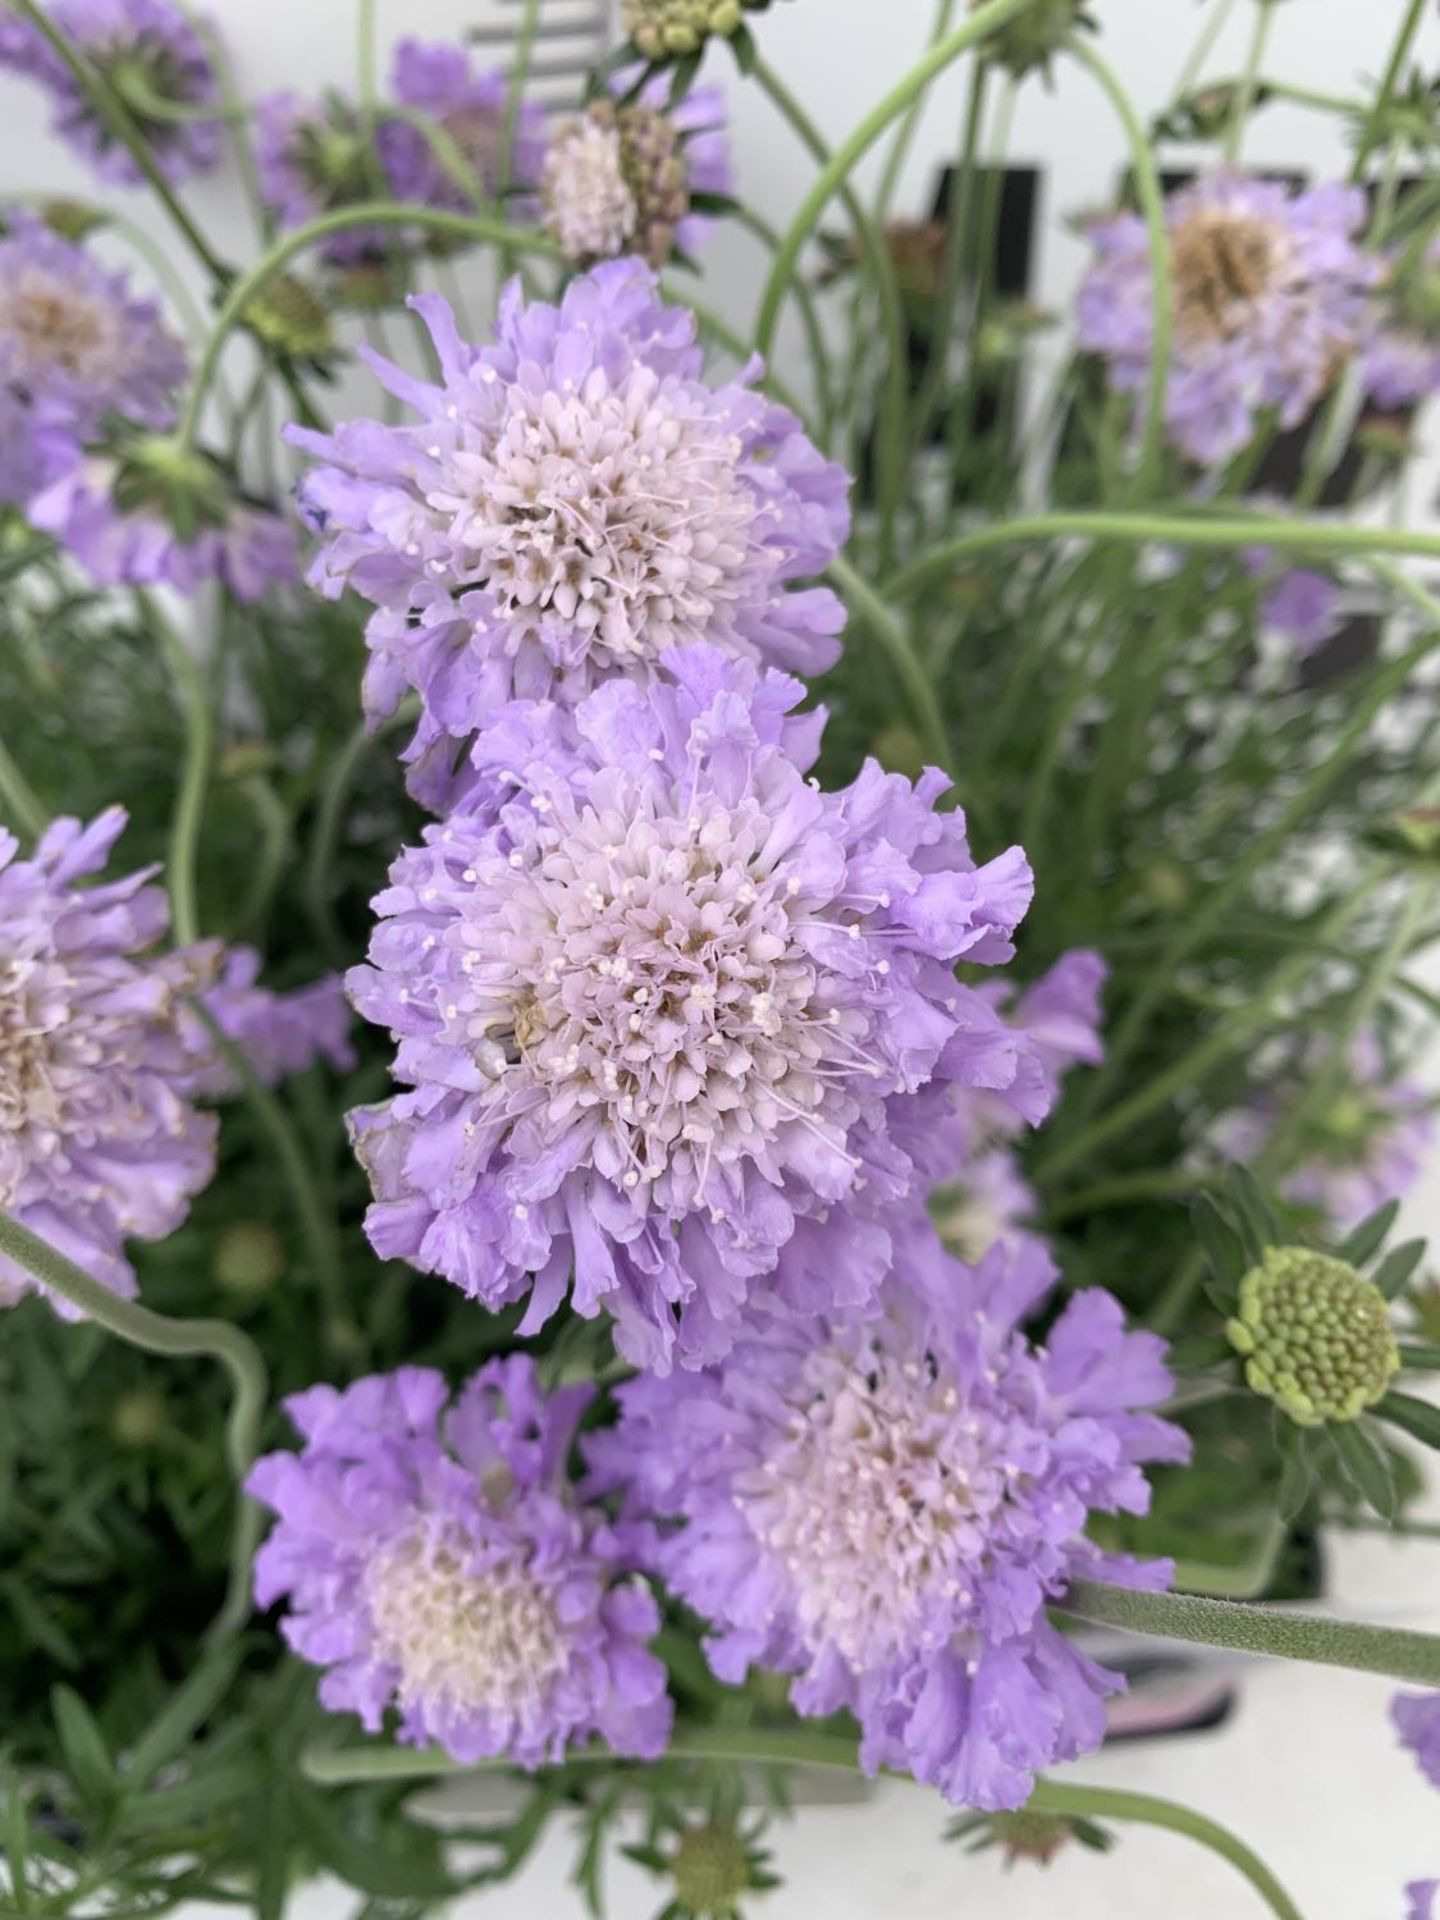 SIX SCABIOSA BUTTERFLY BLUE IN 2 LTR POTS 50-60CM TALL TO BE SOLD FOR THE SIX PLUS VAT - Image 3 of 4